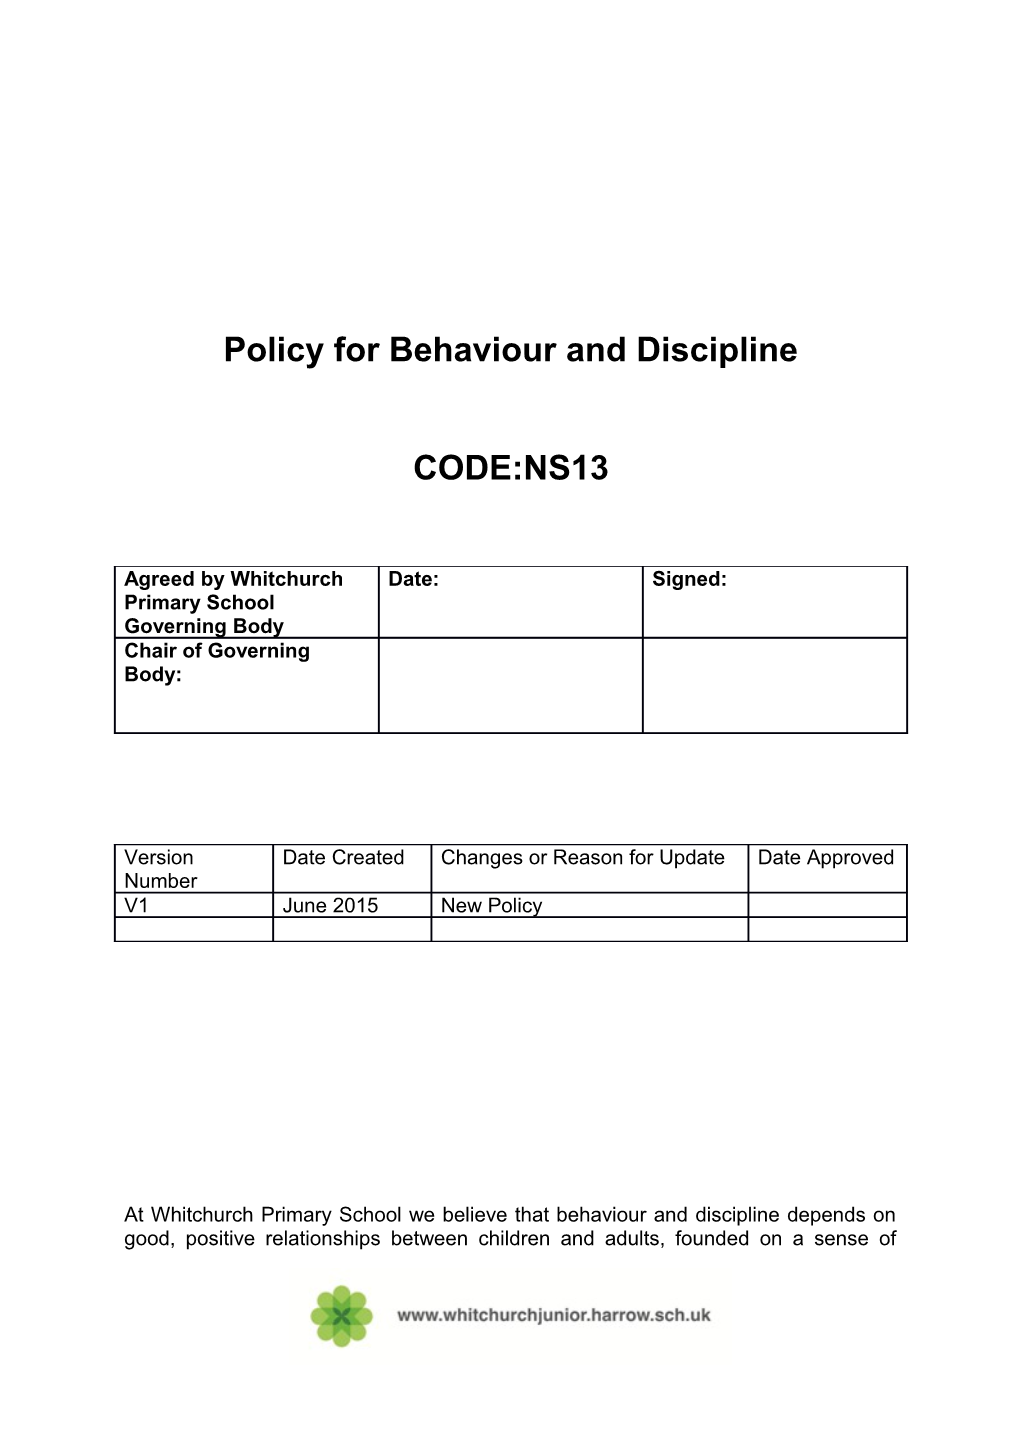 Policy for Behaviour and Discipline